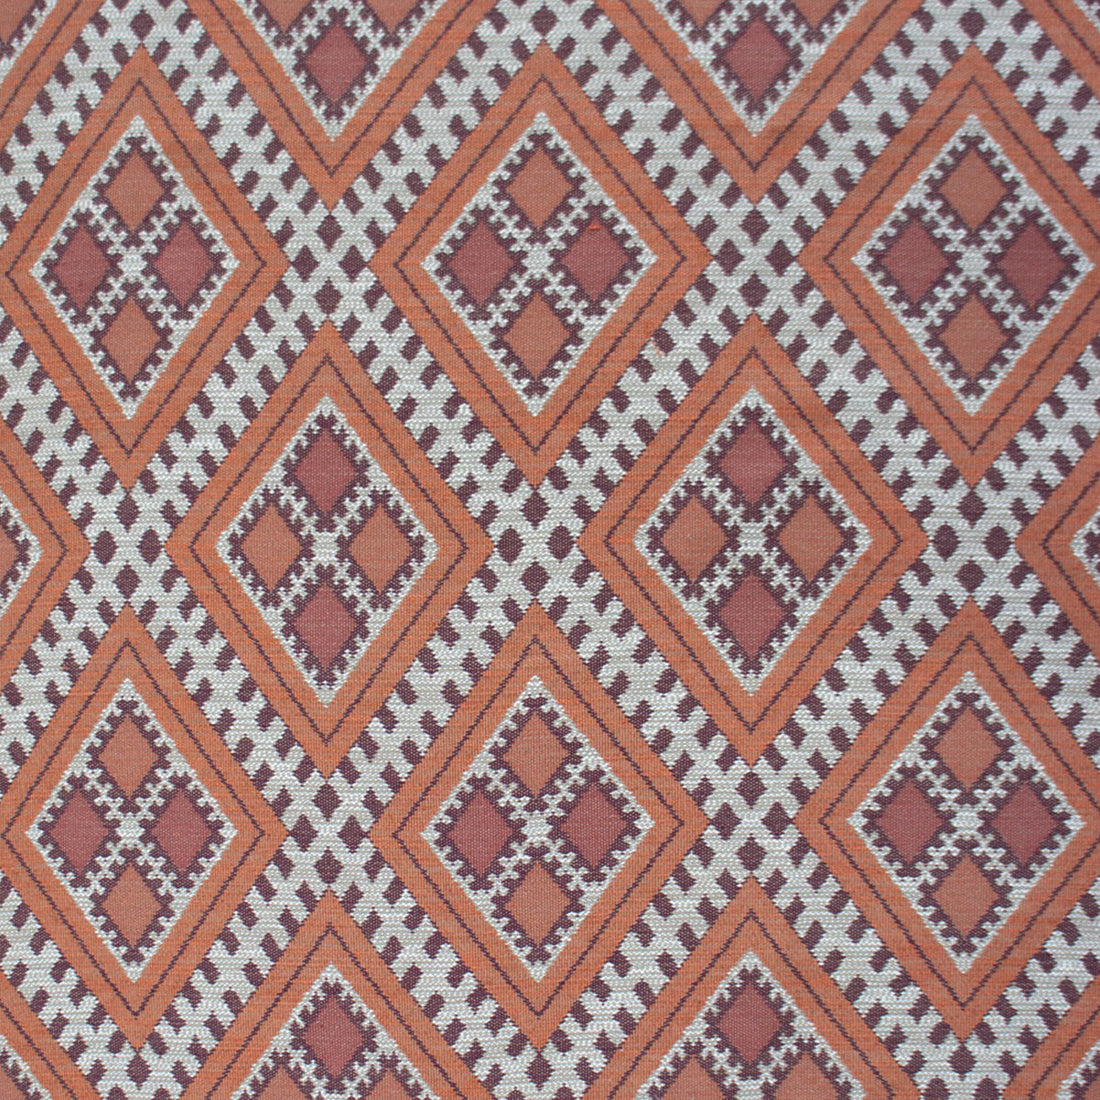 Chihuahua fabric in teja color - pattern GDT5656.002.0 - by Gaston y Daniela in the Gaston Rio Grande collection